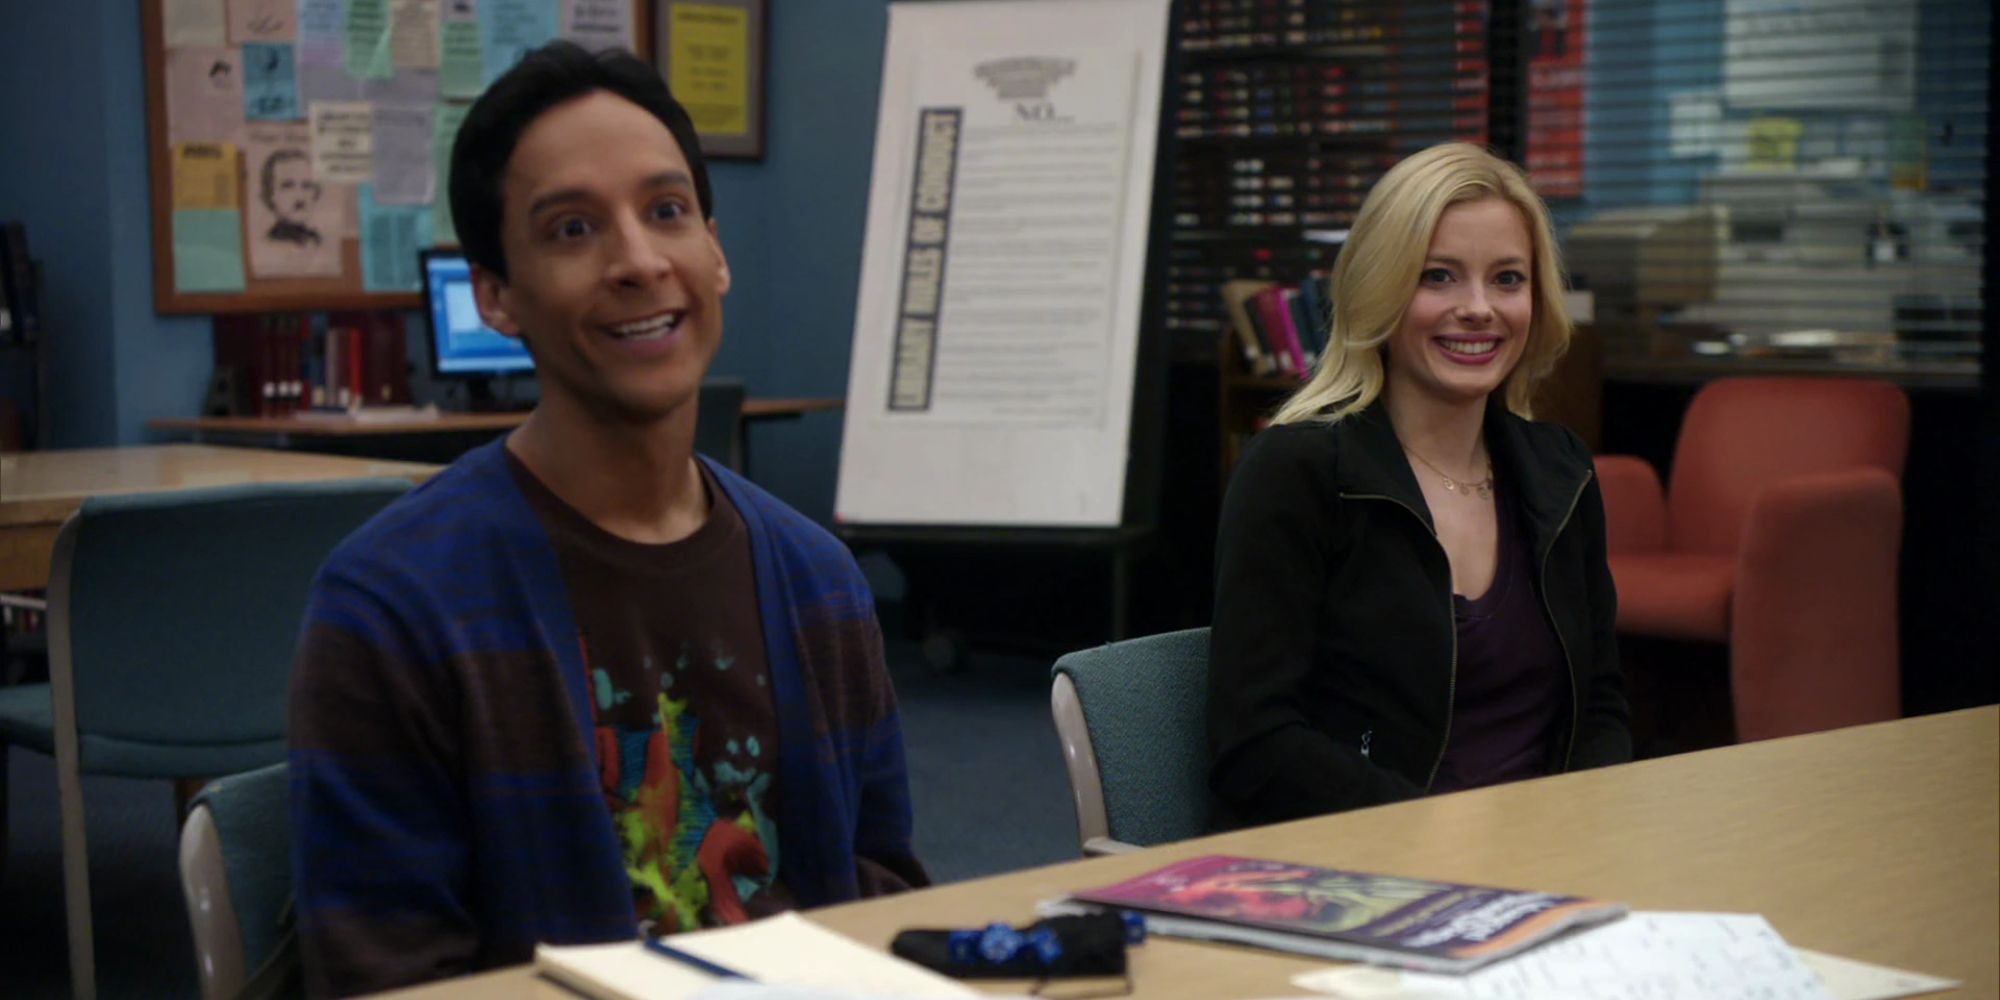 Abed and Britta smiling